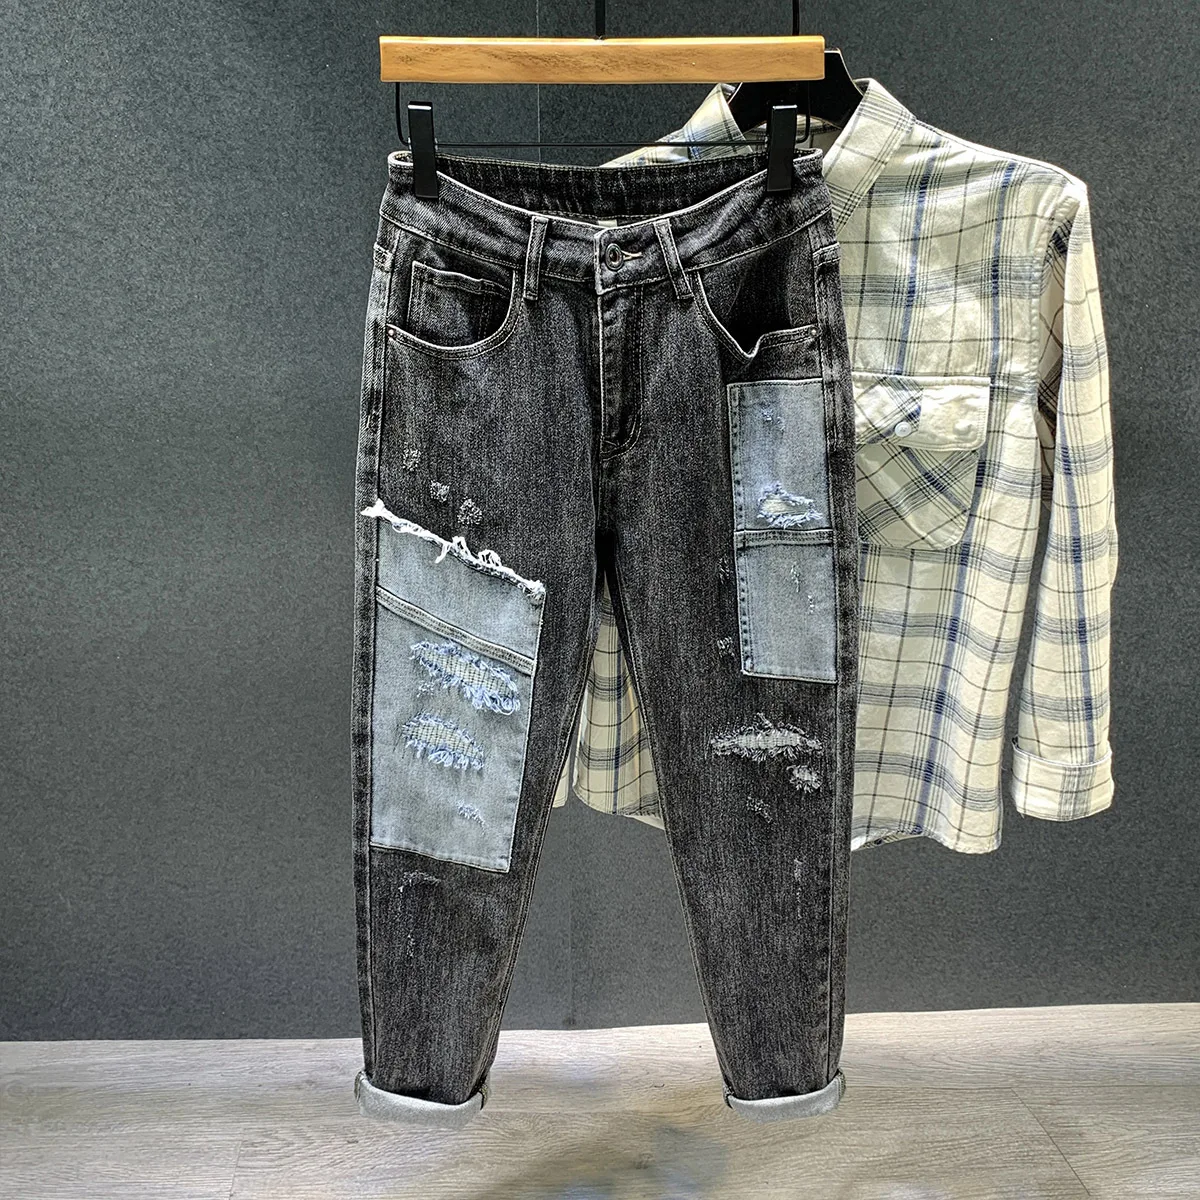 Men Plaid Print Patches Jeans Streetwear Skinny Tapered Stretch Denim Pants  Holes Ripped Patchwork Trousers - AliExpress